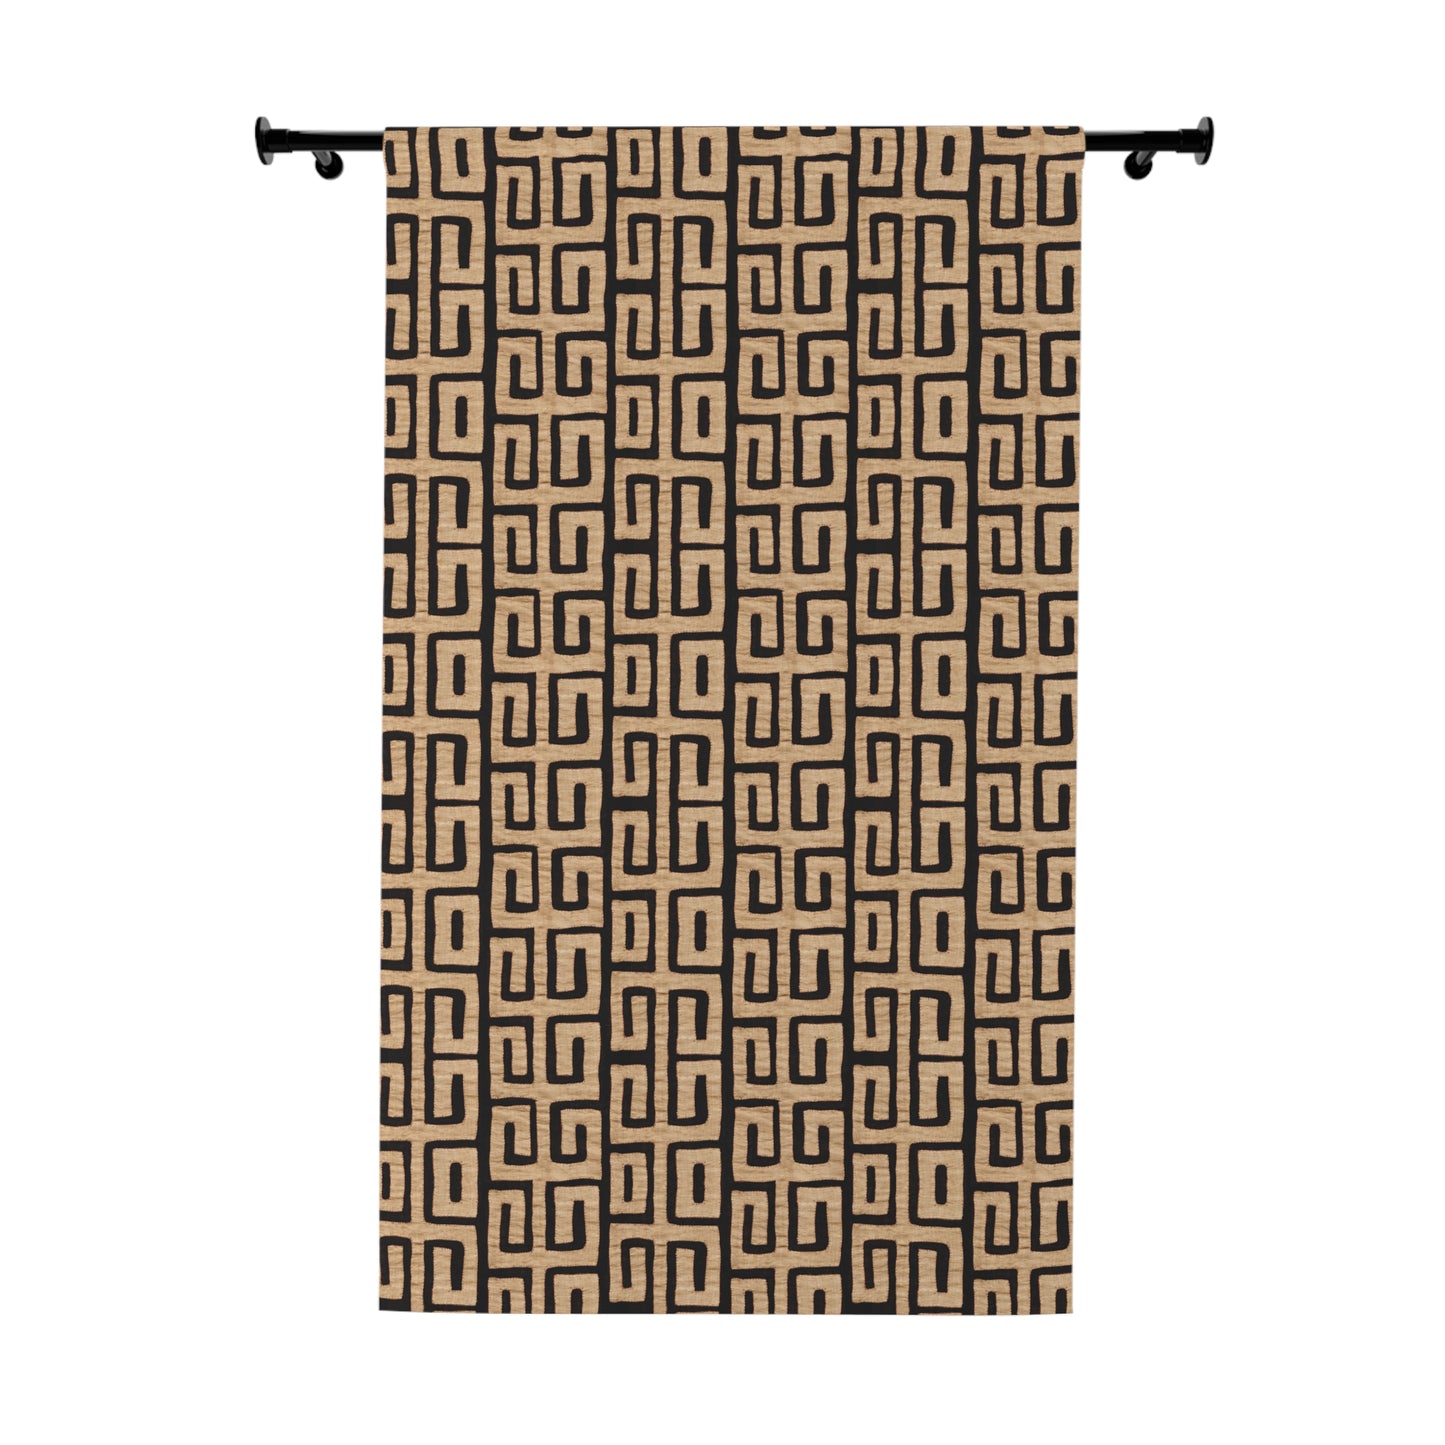 Afro Boho Curtains with Blackout in Traditional Kuba Cloth Design - Tan